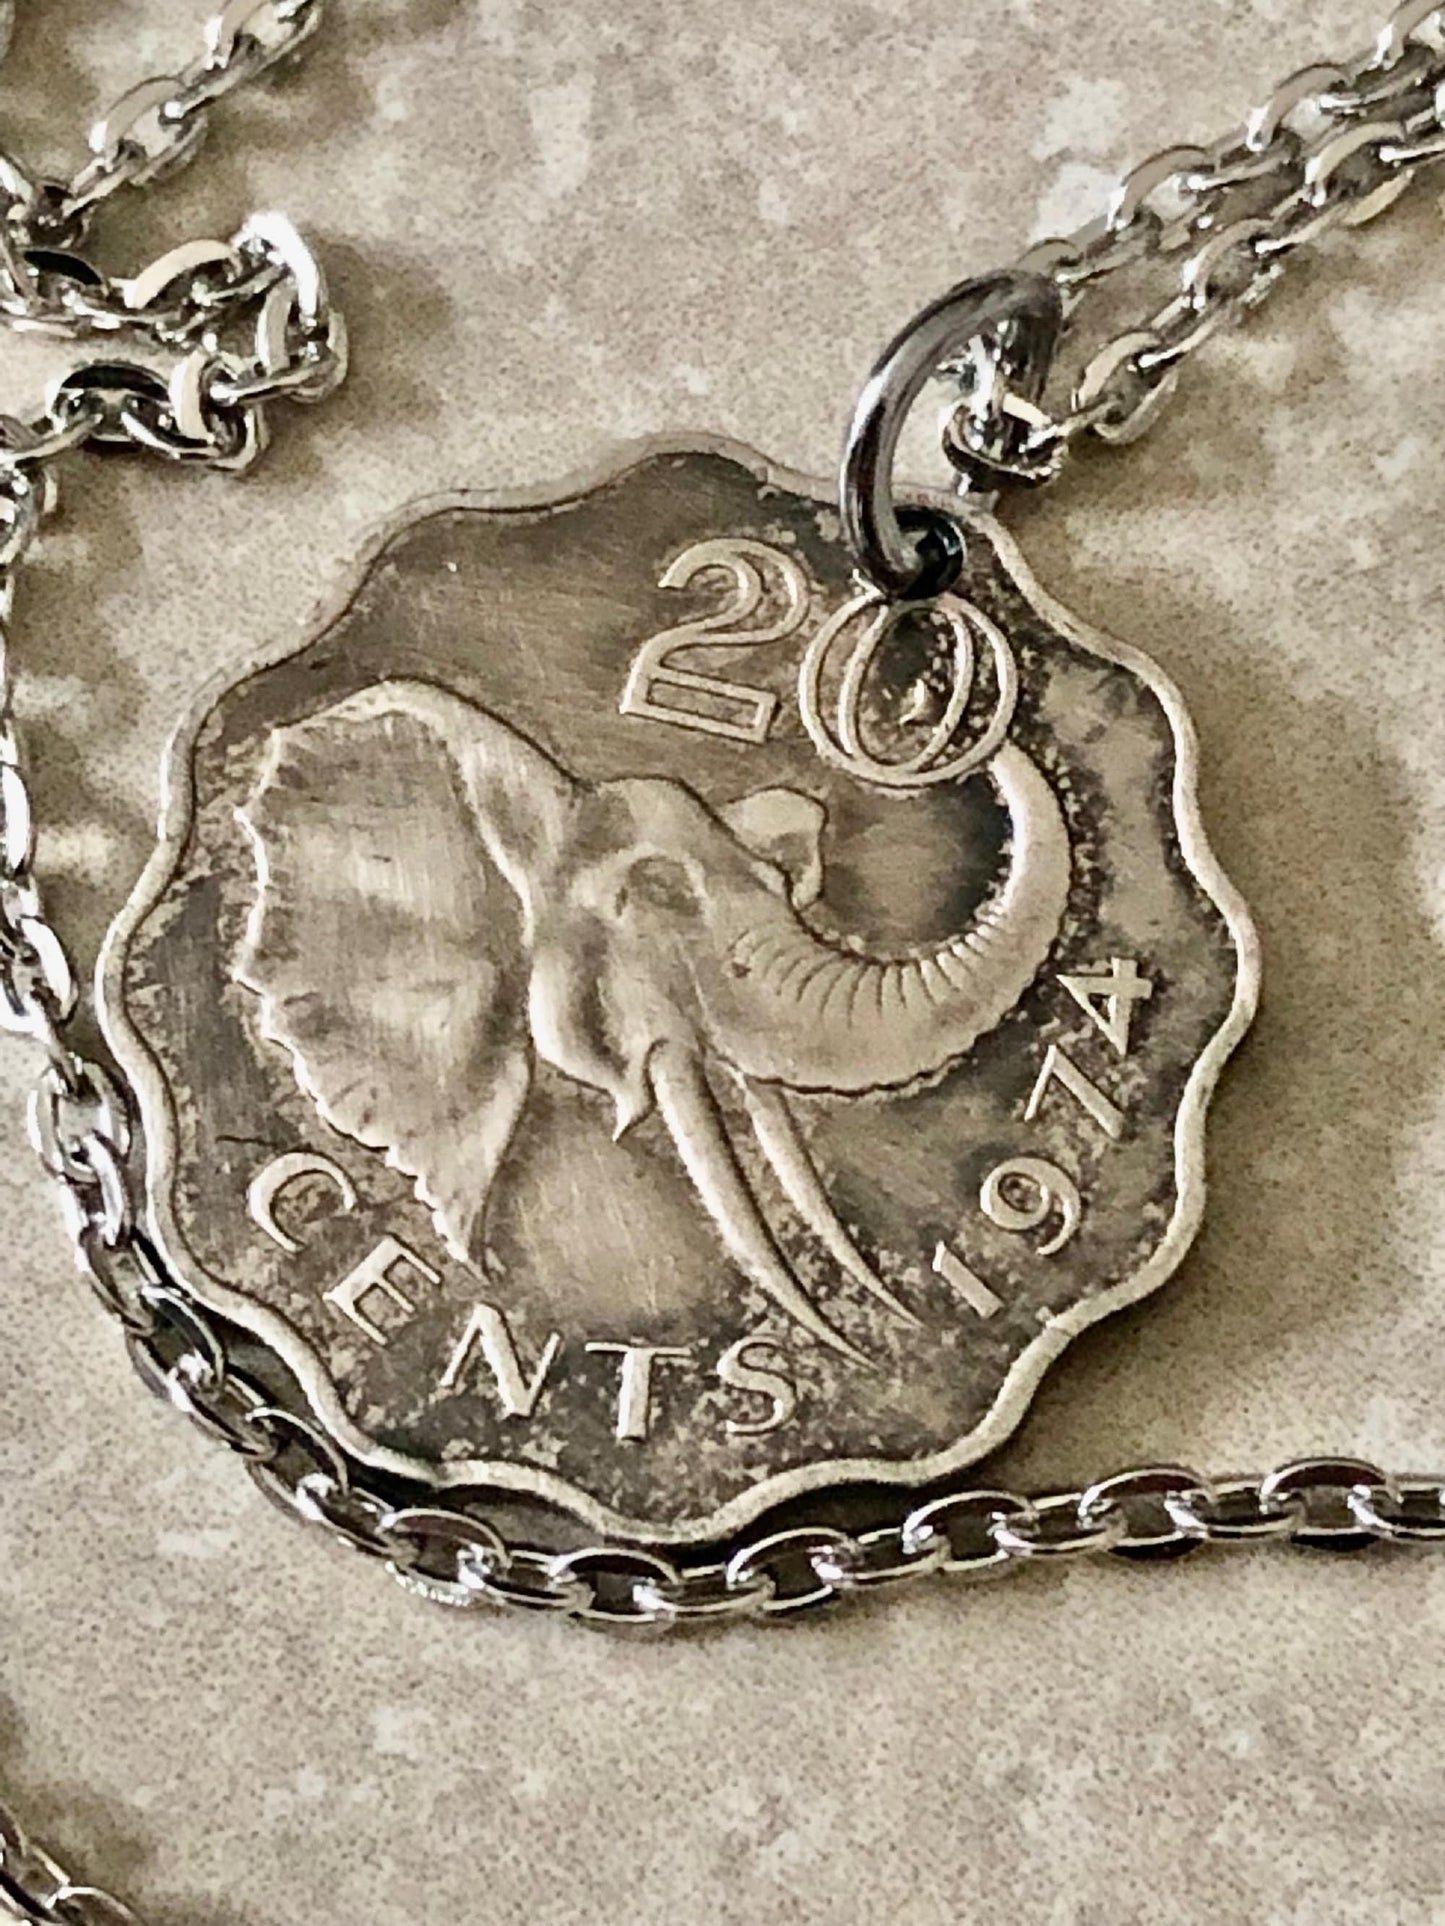 South Africa Coin Necklace Swaziland 20 Cents African Pendant Vintage Rare Eswatini Coins Coin Enthusiast Fashion Accessory Handmade